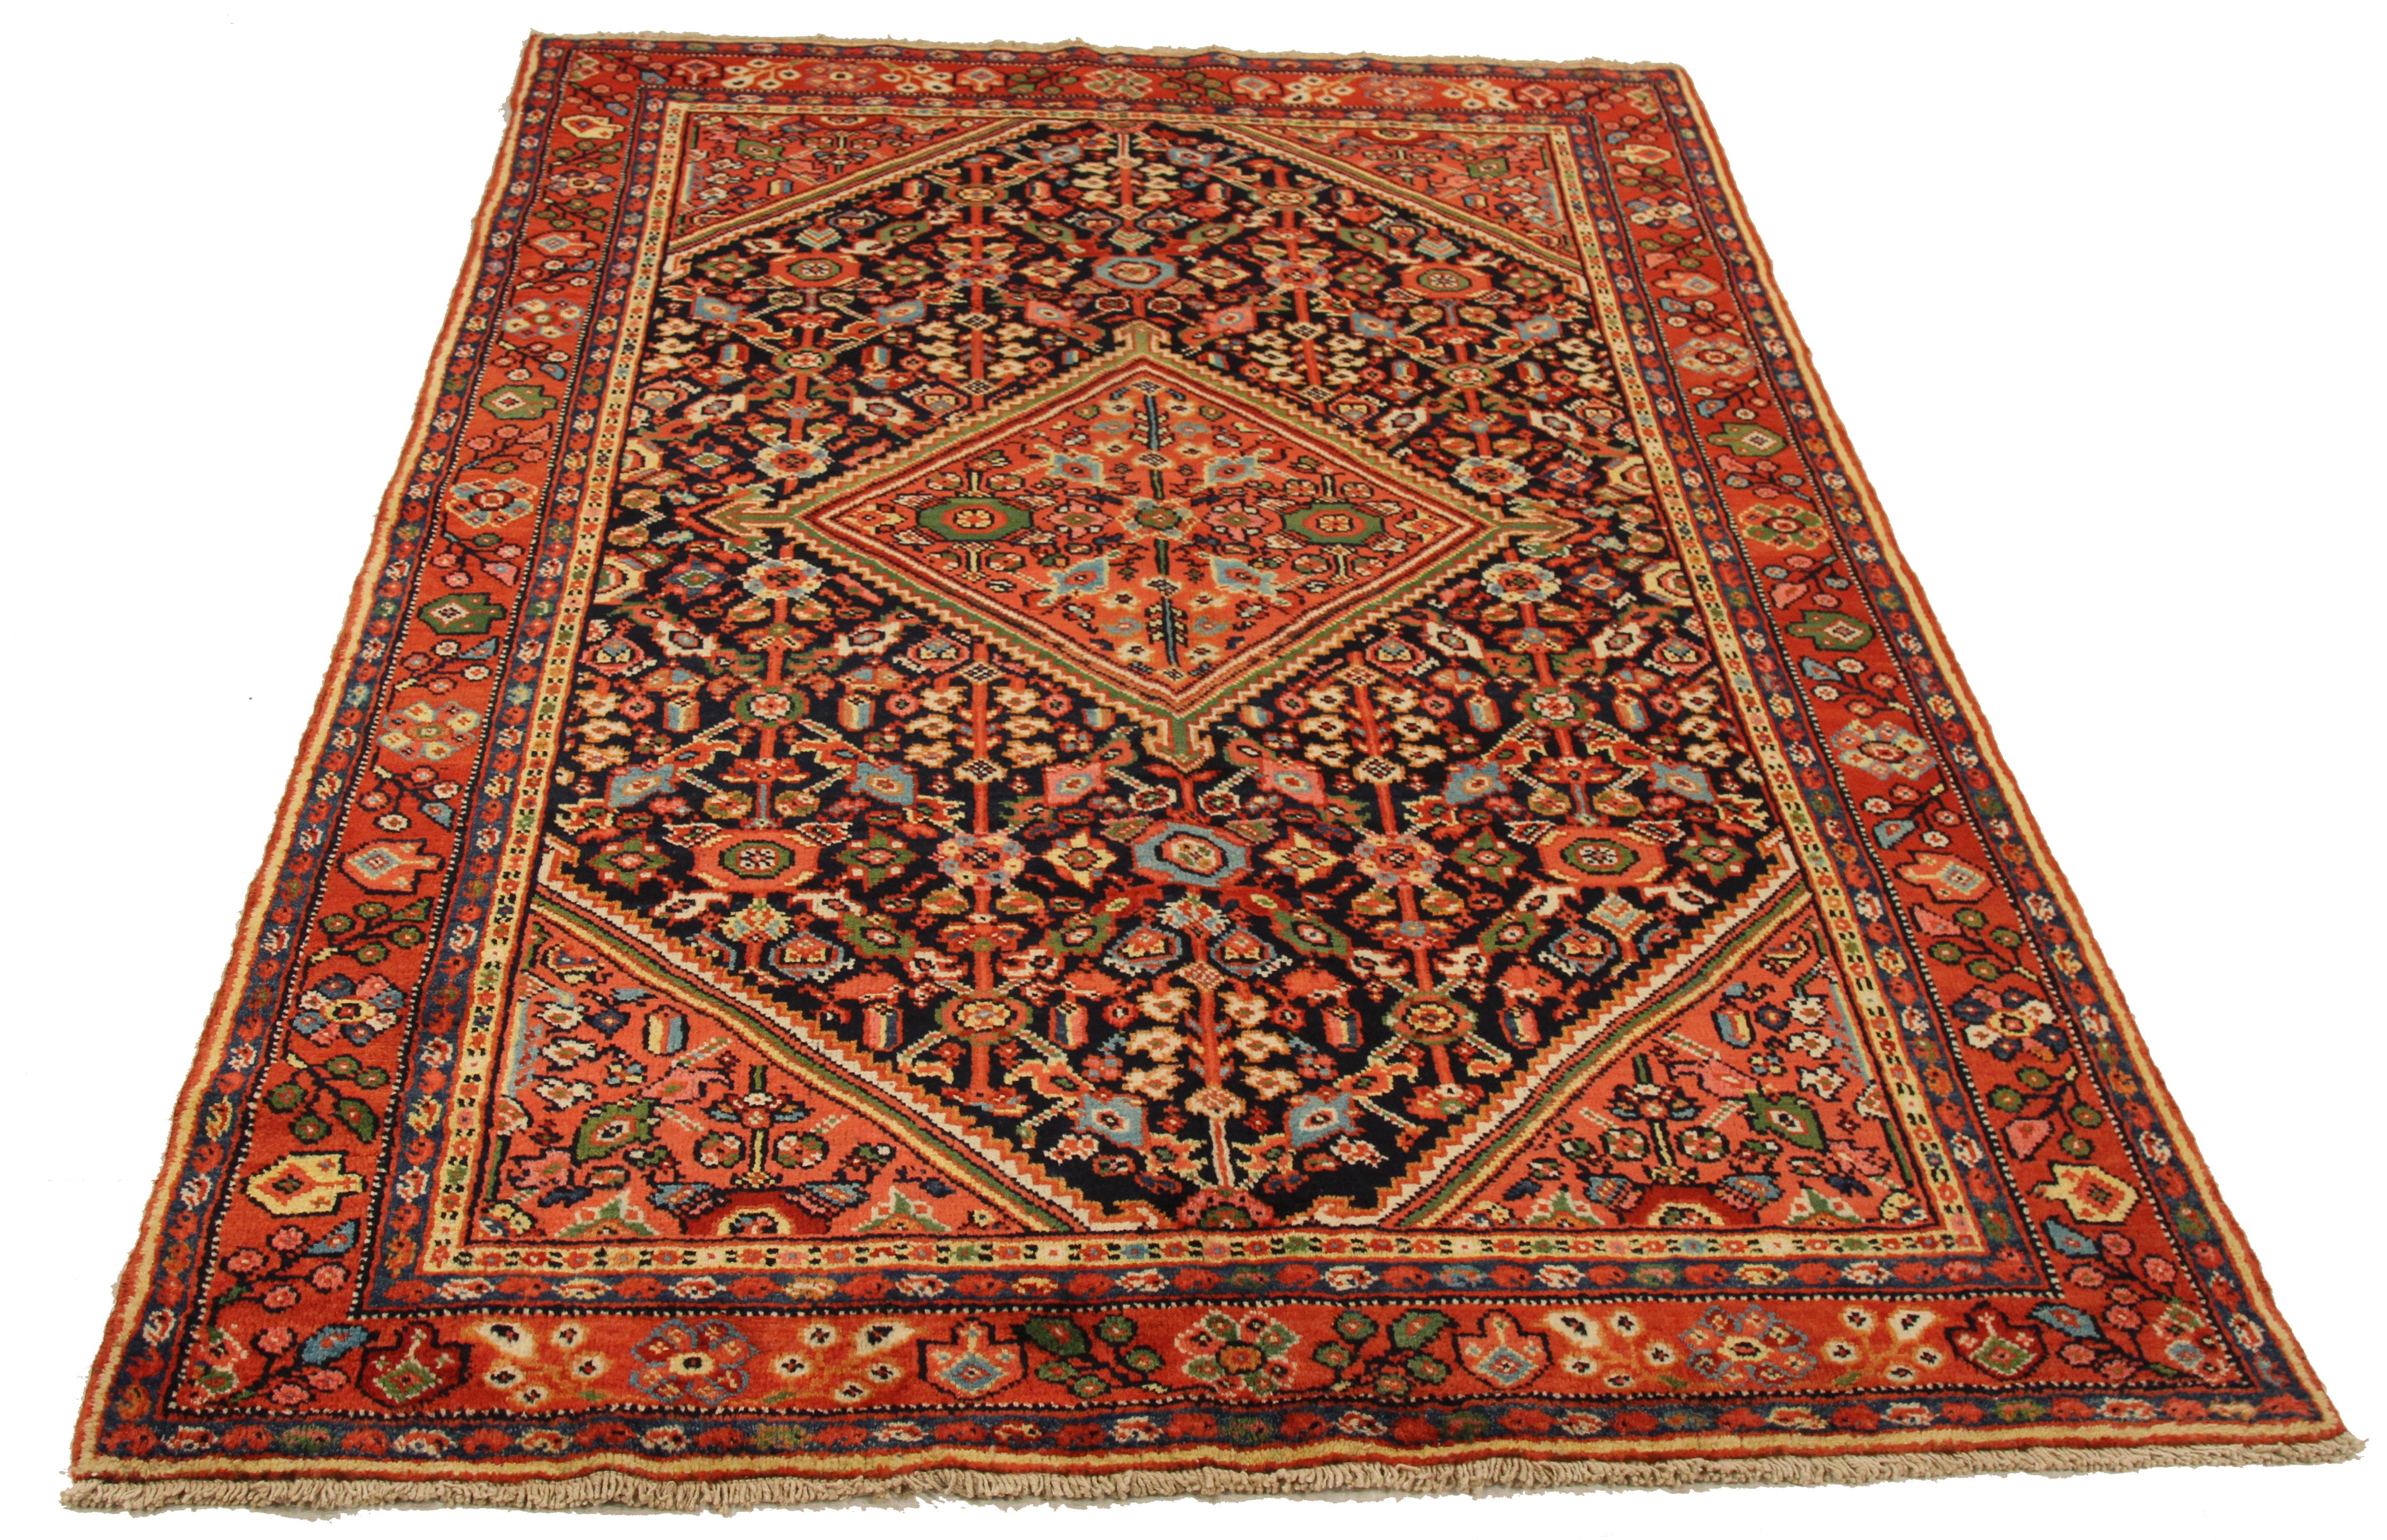 Mid-20th century hand-woven Persian area rug made from fine wool and all-natural vegetable dyes that are safe for people and pets. It features traditional Mahal weaving depicting intricate floral and botanical patterns. 

This area rug has